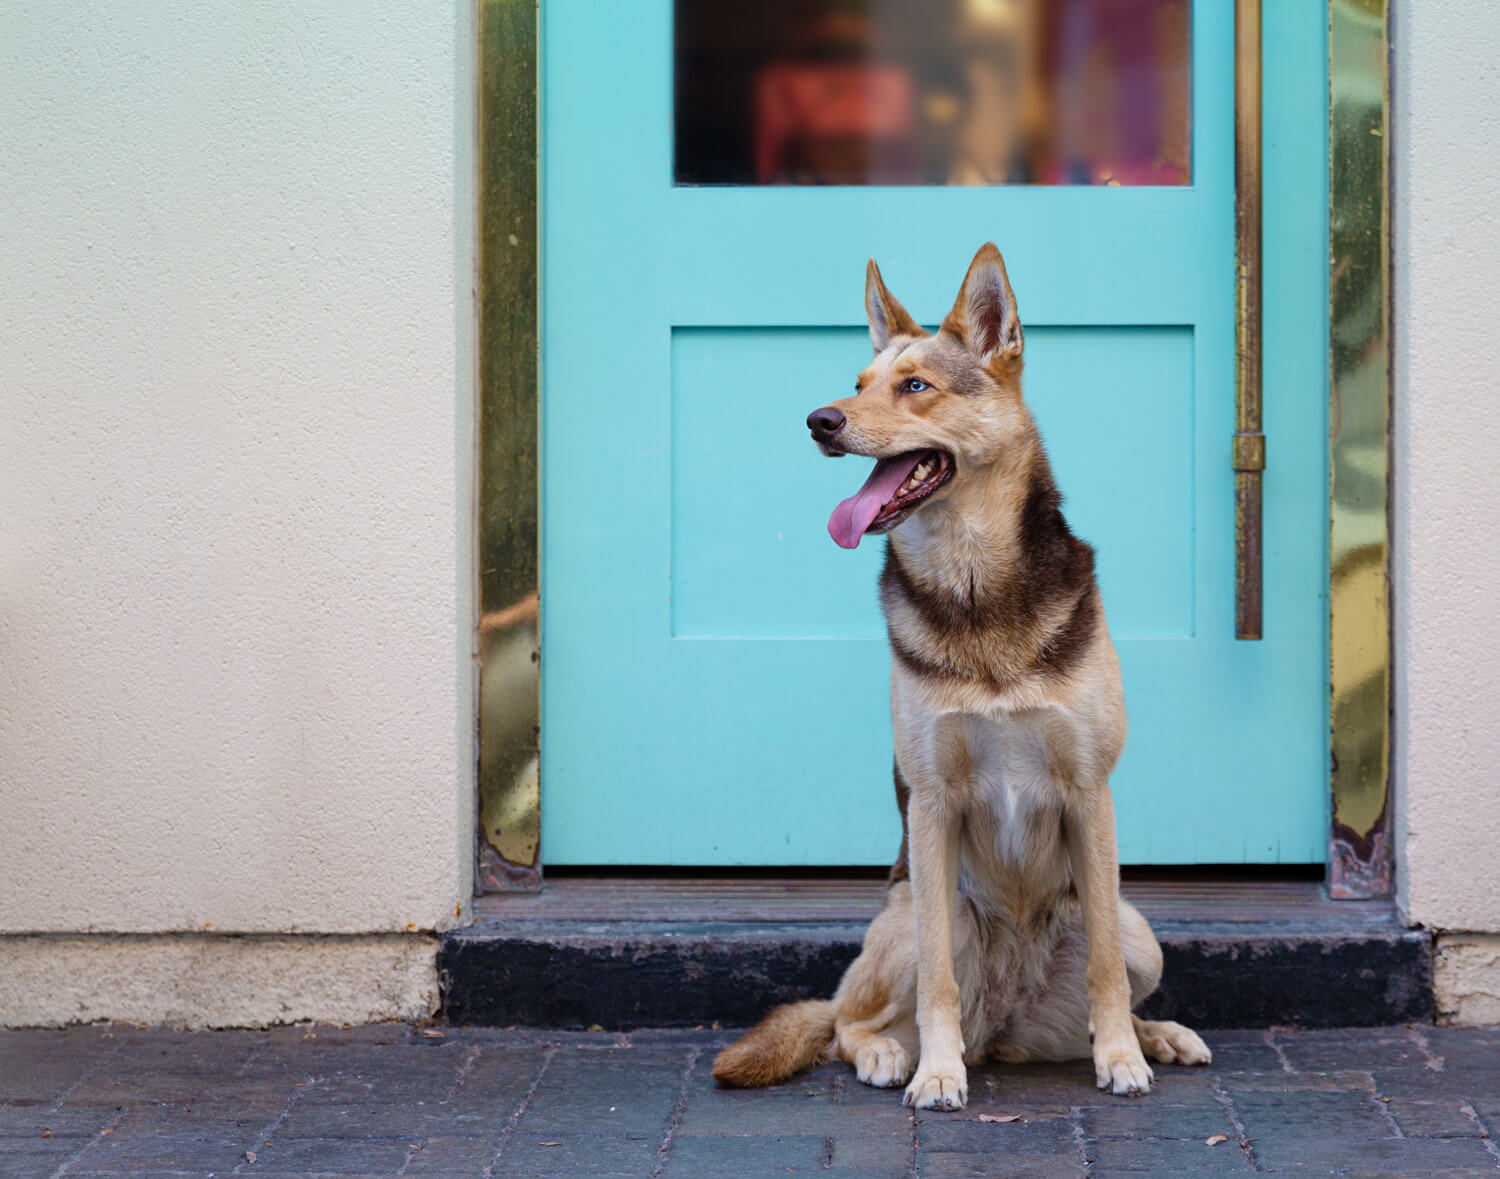  Here’s Harley, a Husky mix - I love how her eyes match the door!  She was super amazing at her city dog photography shoot in Toronto 